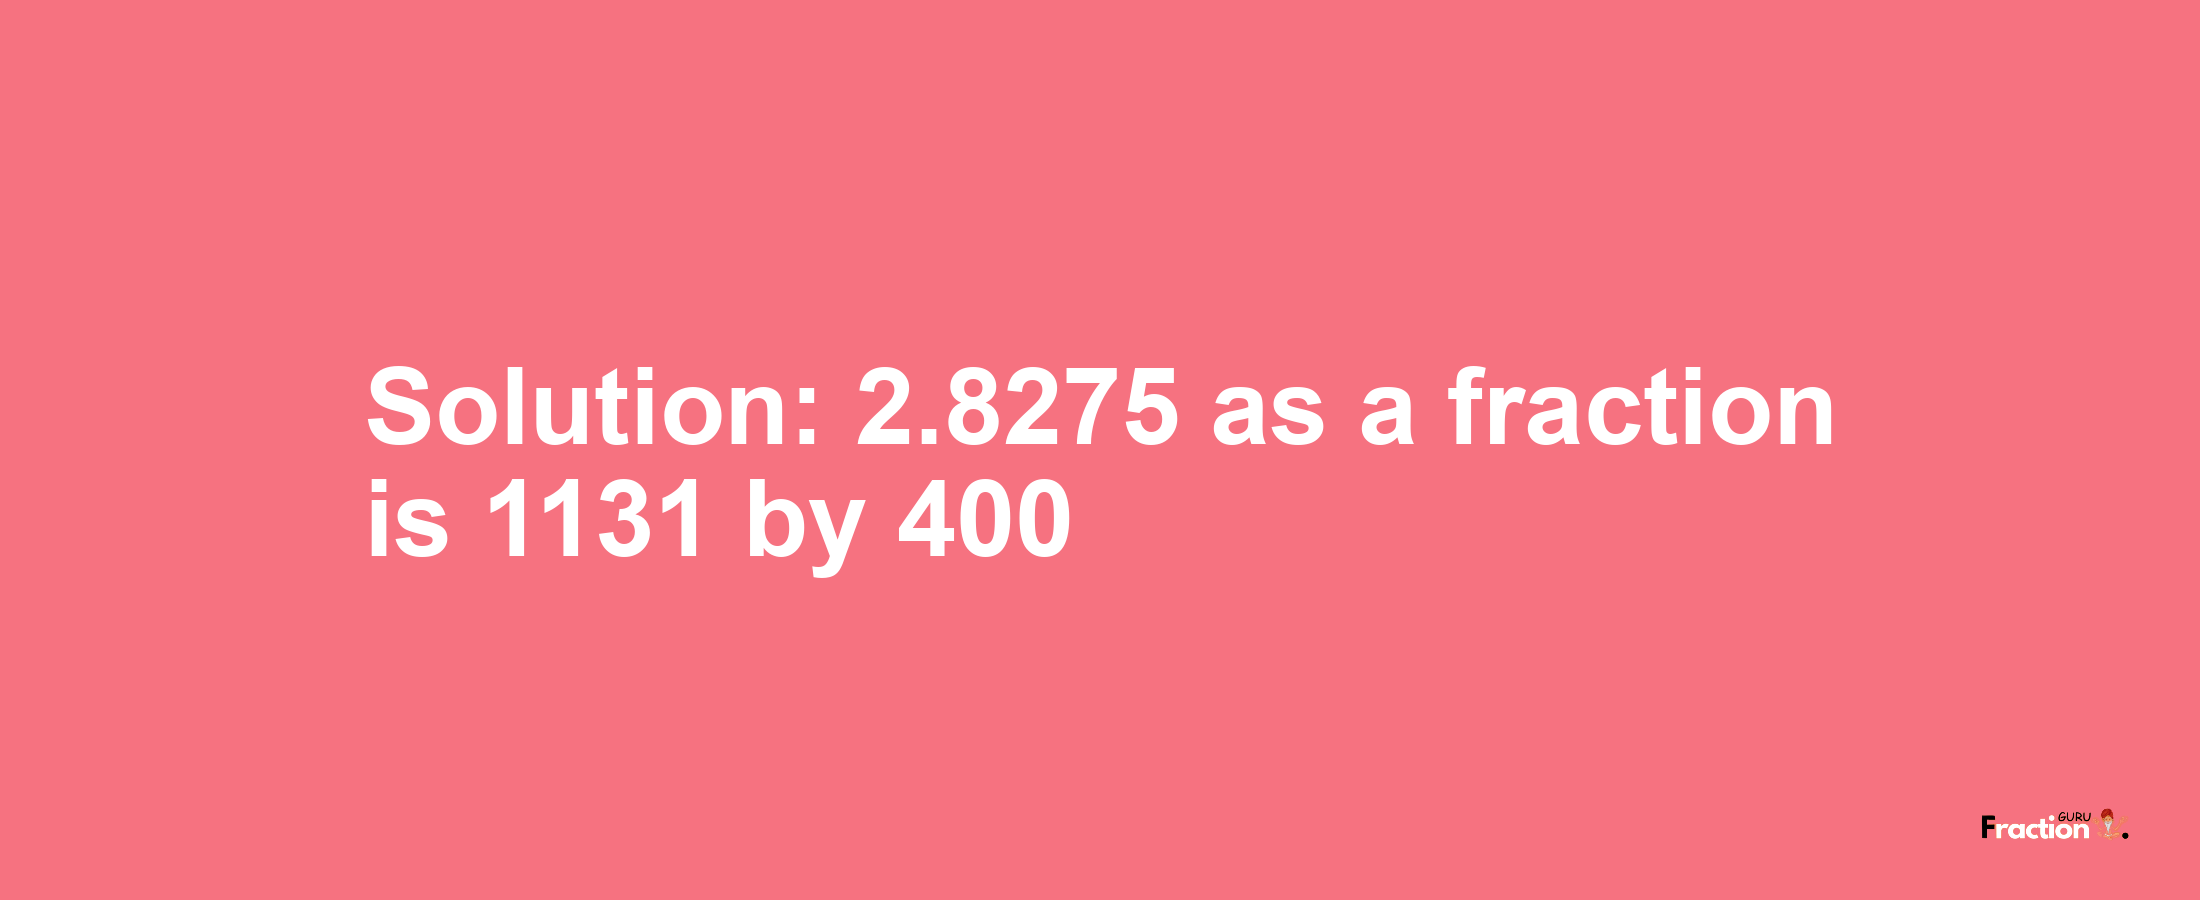 Solution:2.8275 as a fraction is 1131/400